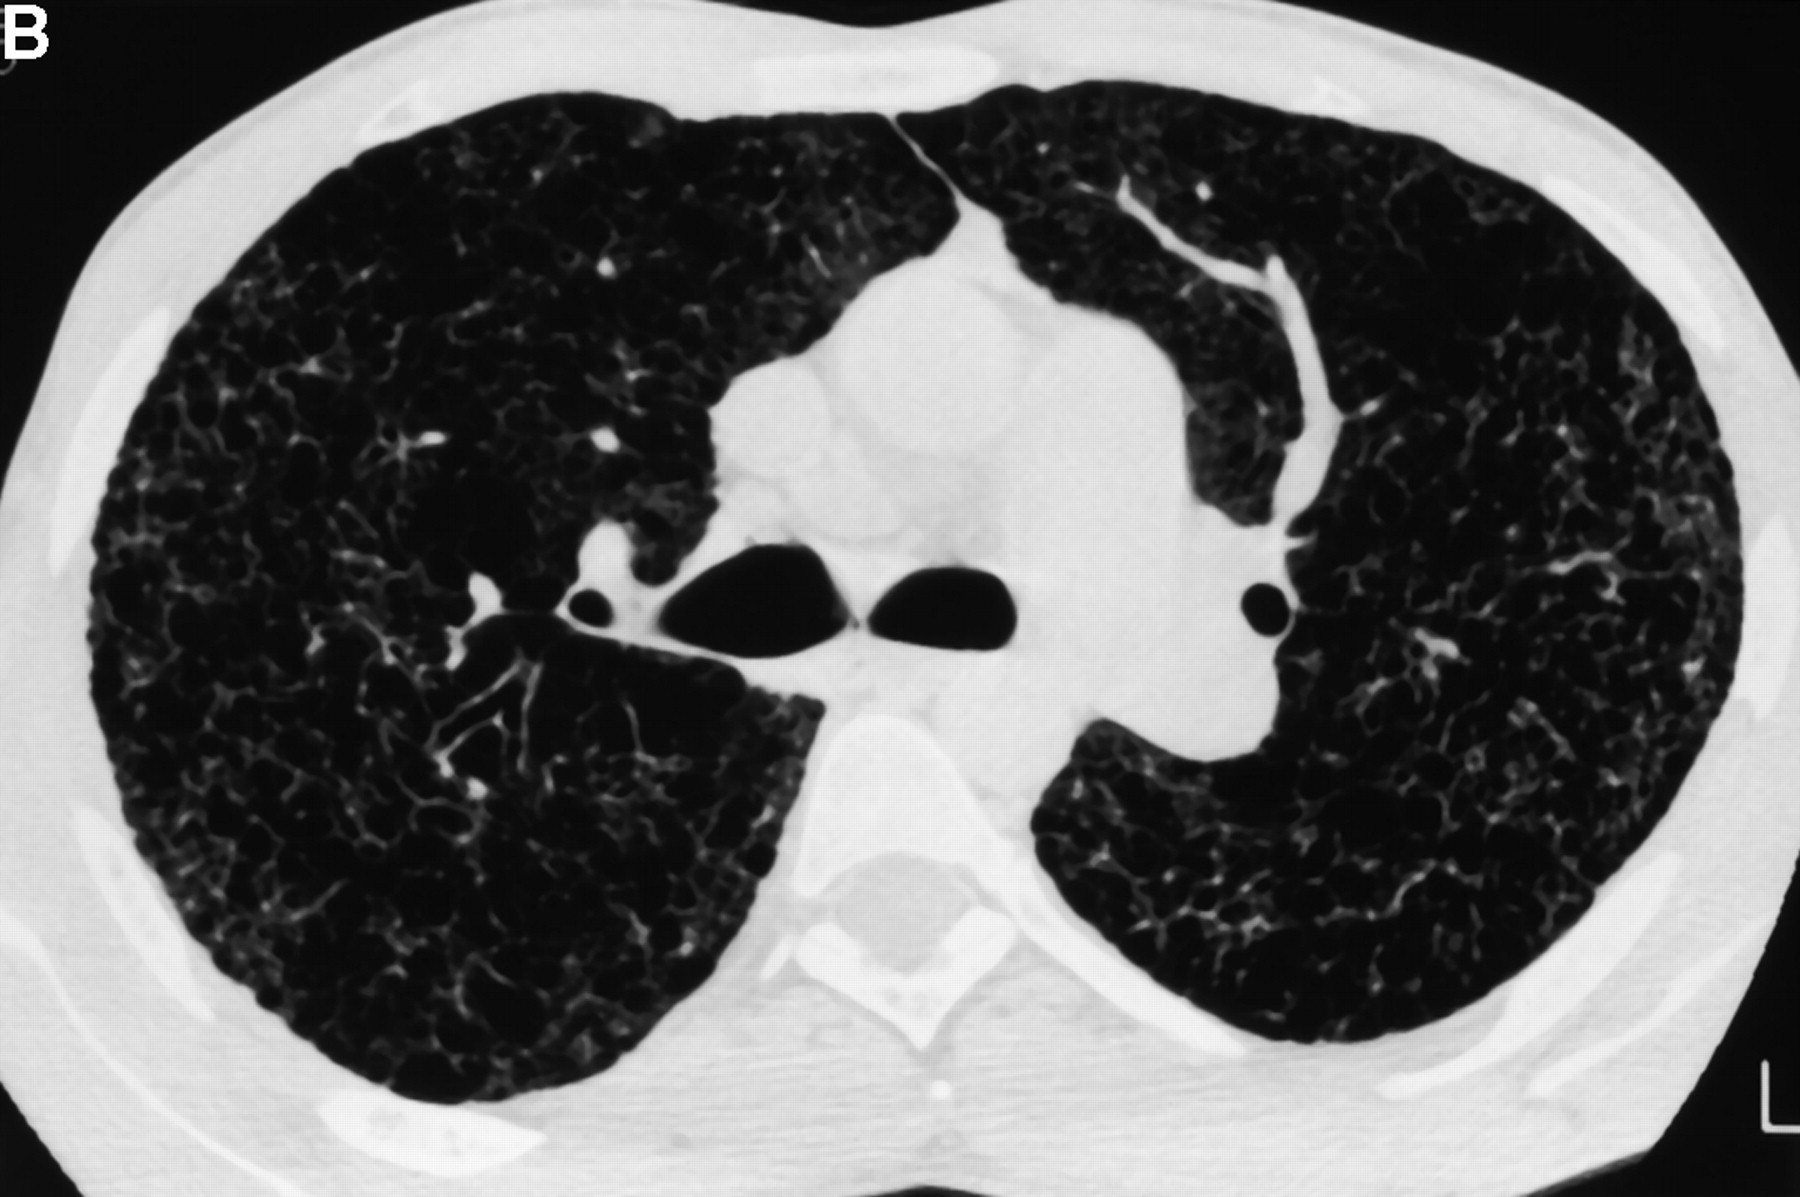 File:Ct-scan for a patient with advanced Histiocytosis X associated with severe pulmonary hypertension.jpeg